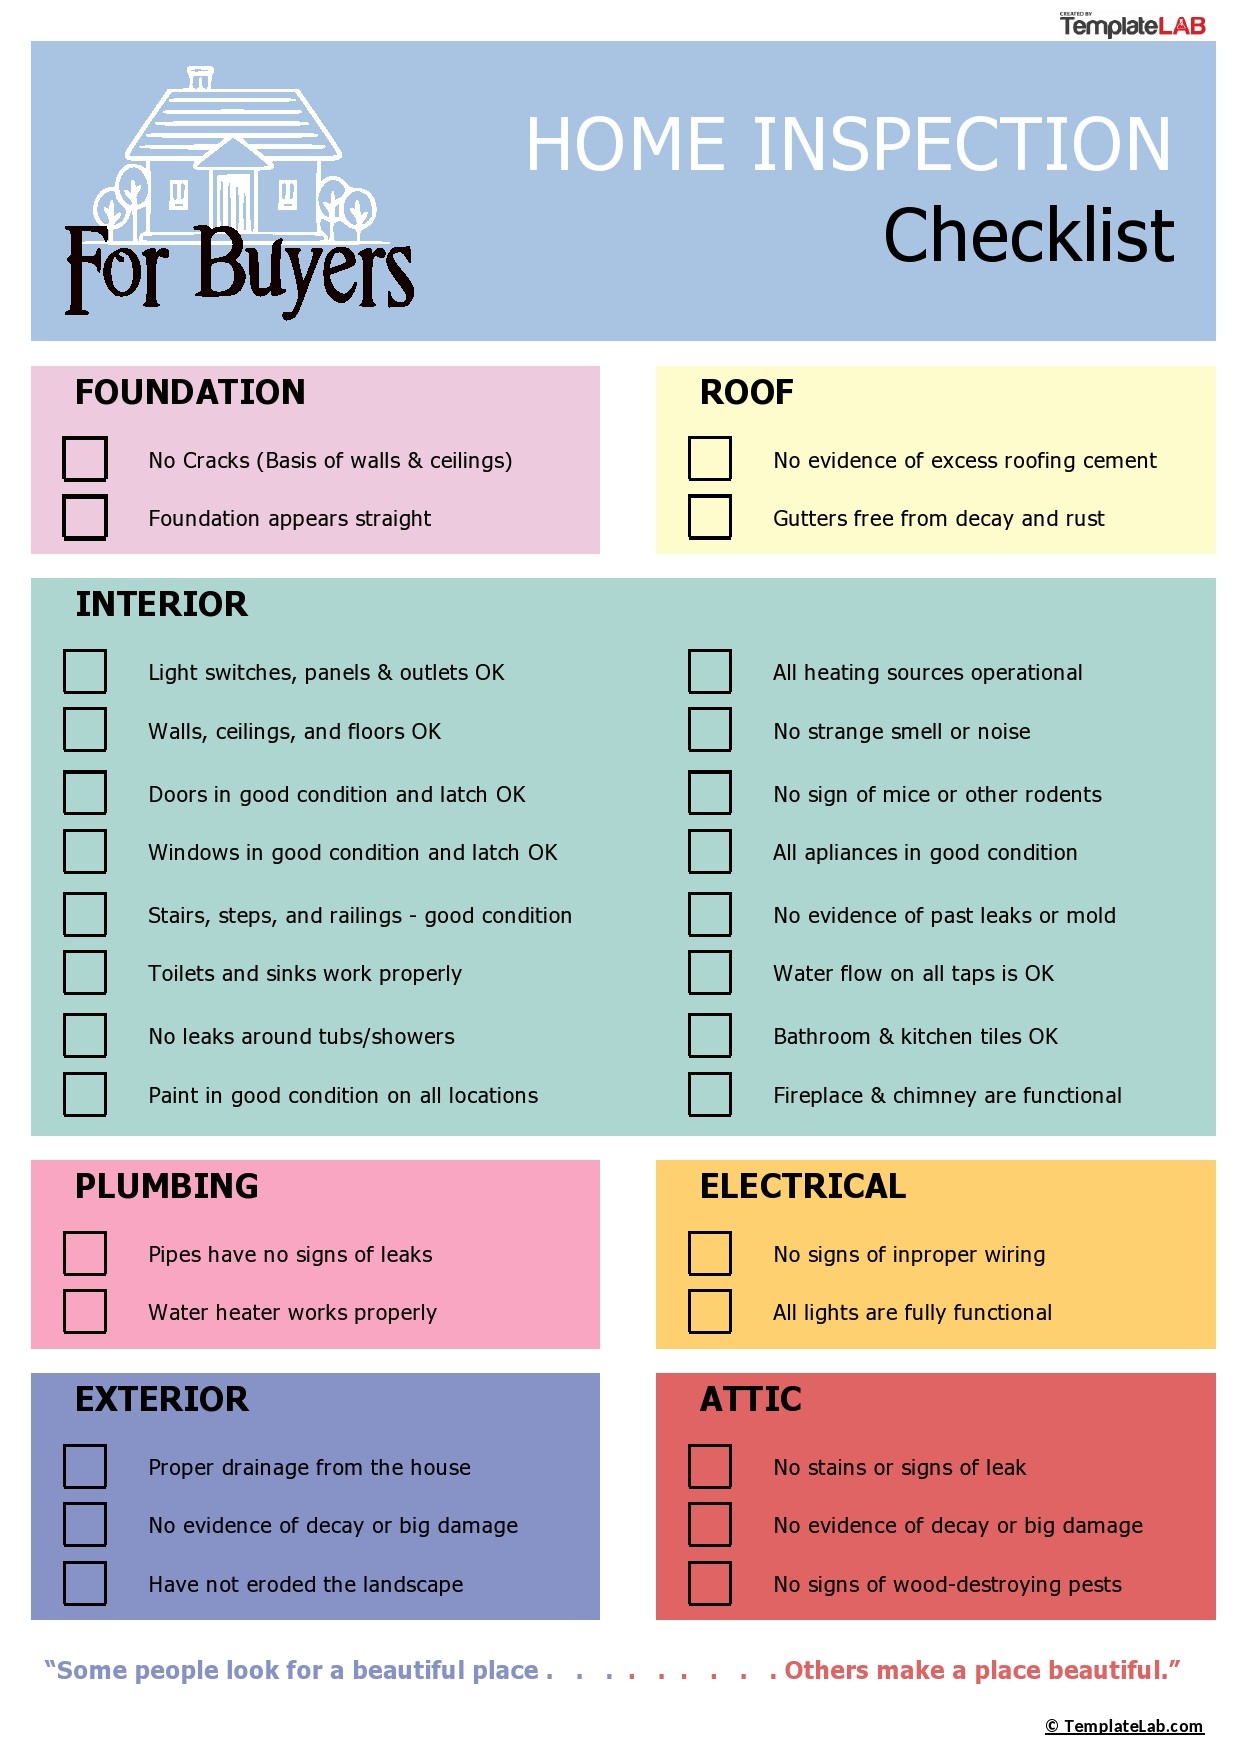 Home-Inspection-Checklist-for-Buyers-TemplateLab.com_